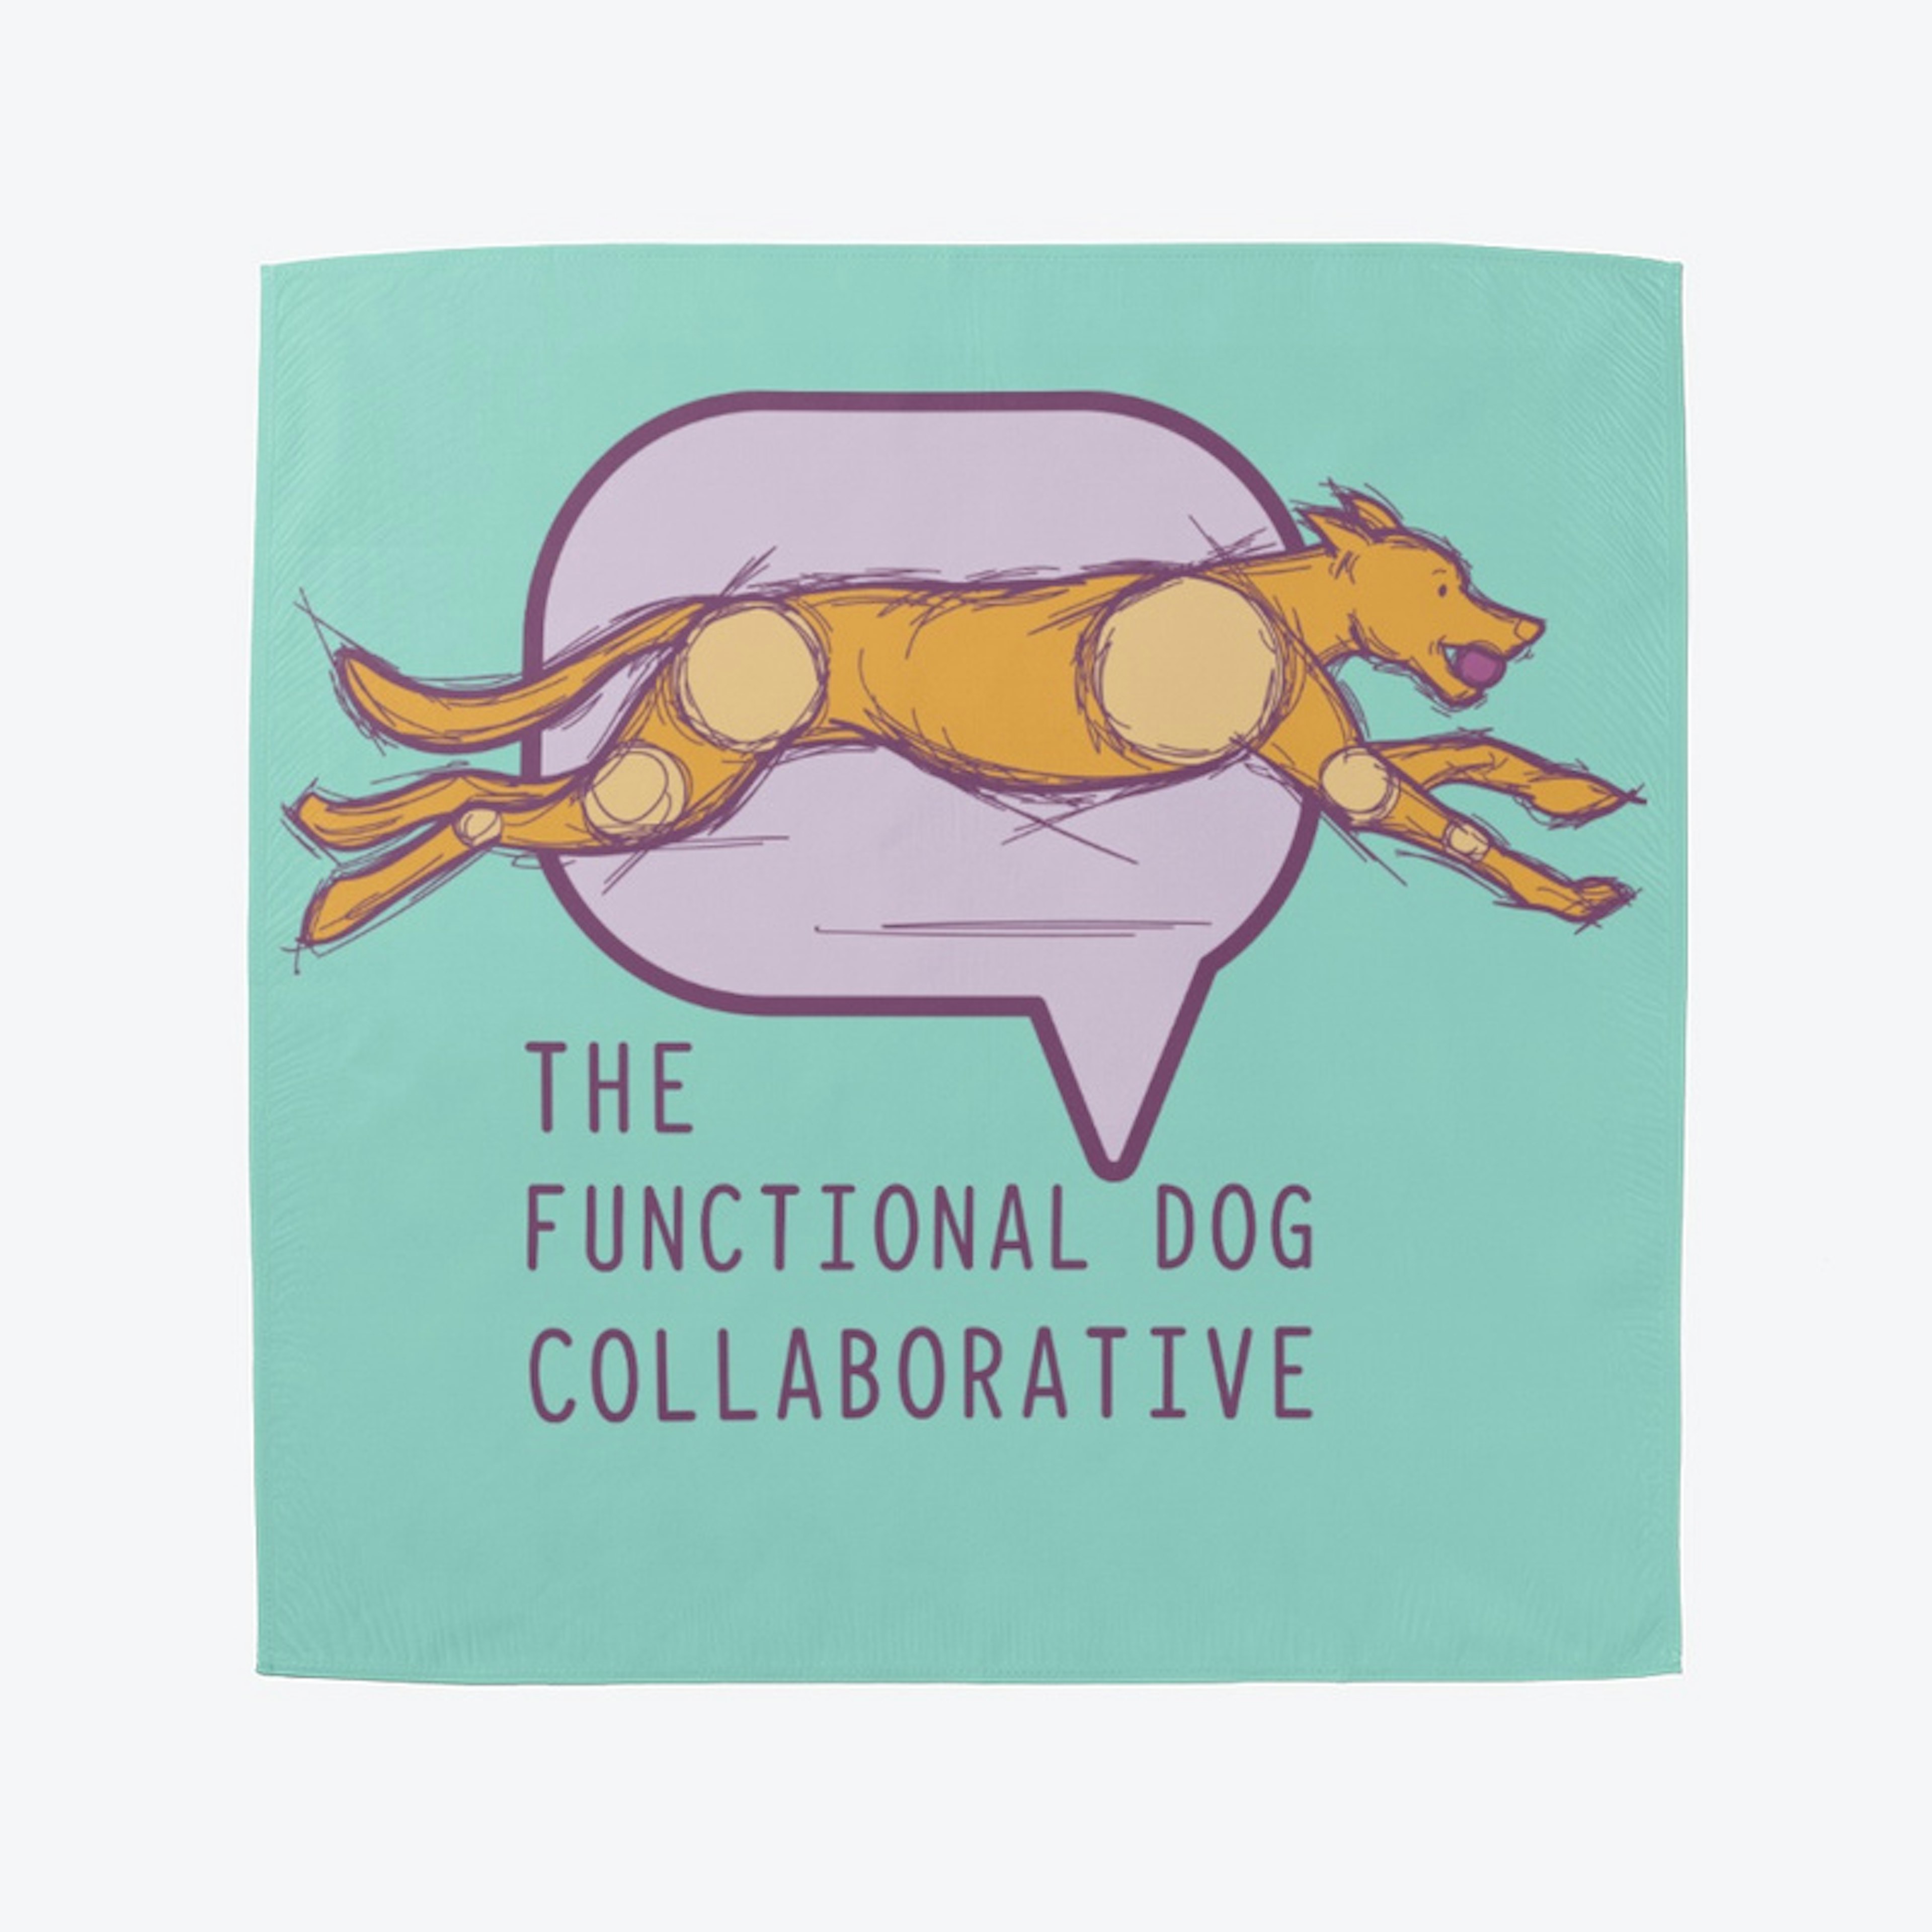 The Functional Dog Collaborative